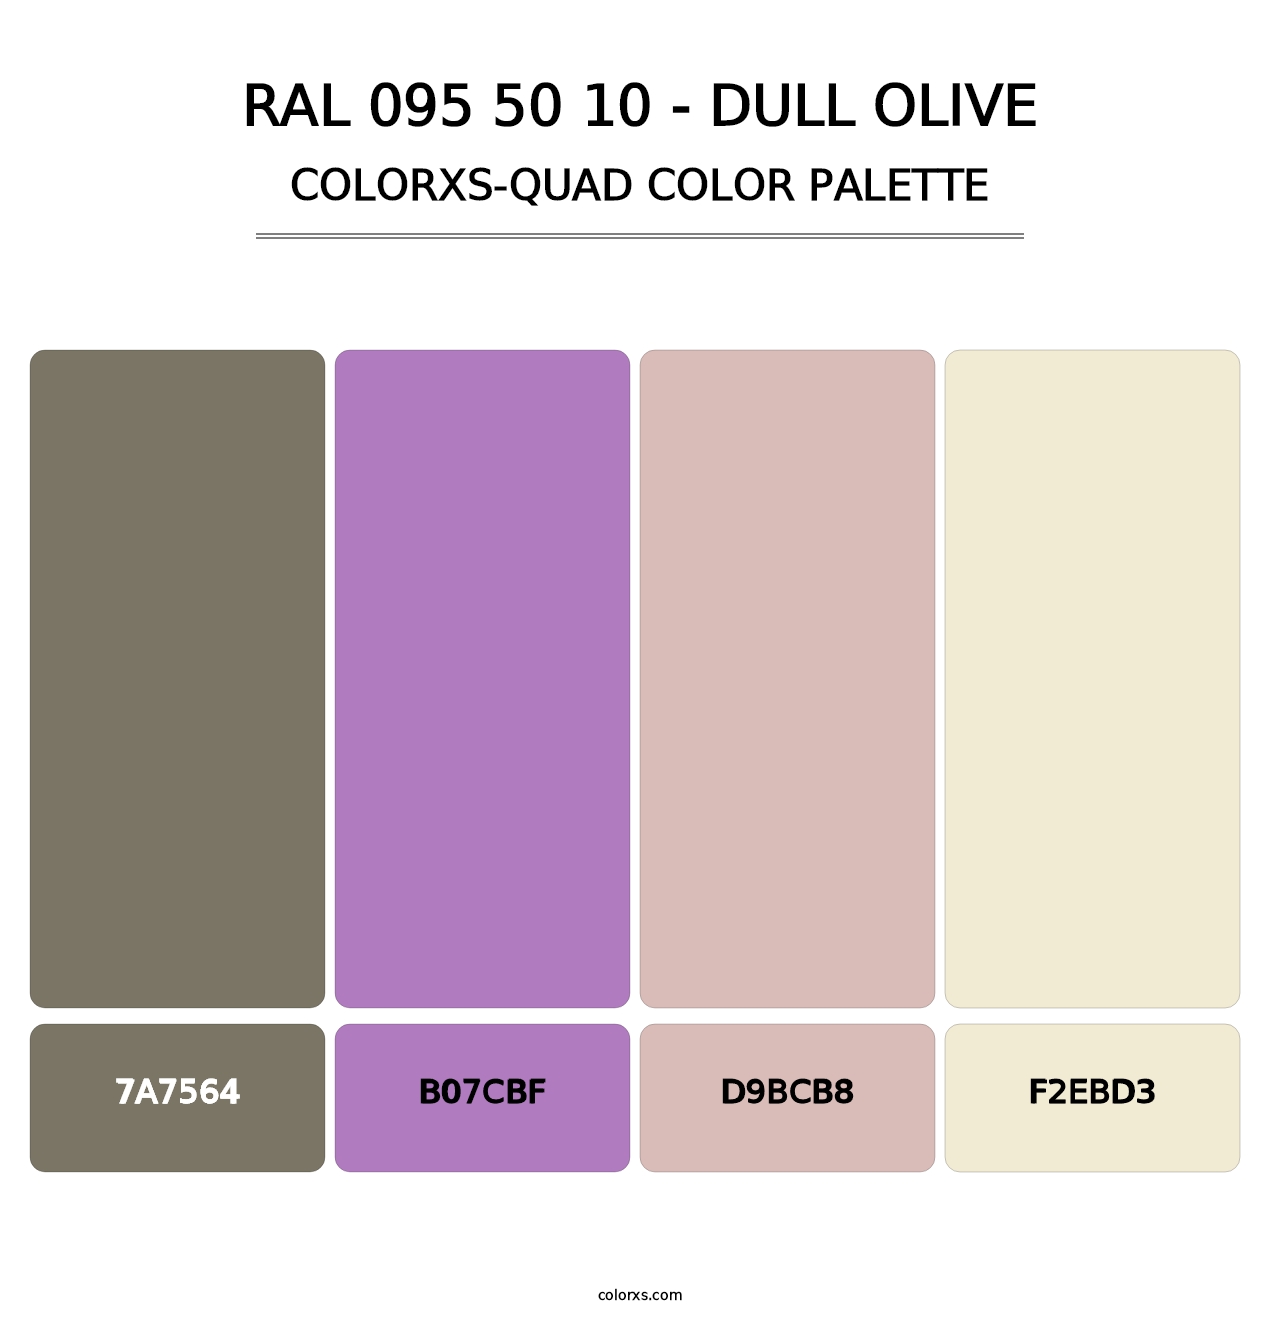 RAL 095 50 10 - Dull Olive - Colorxs Quad Palette